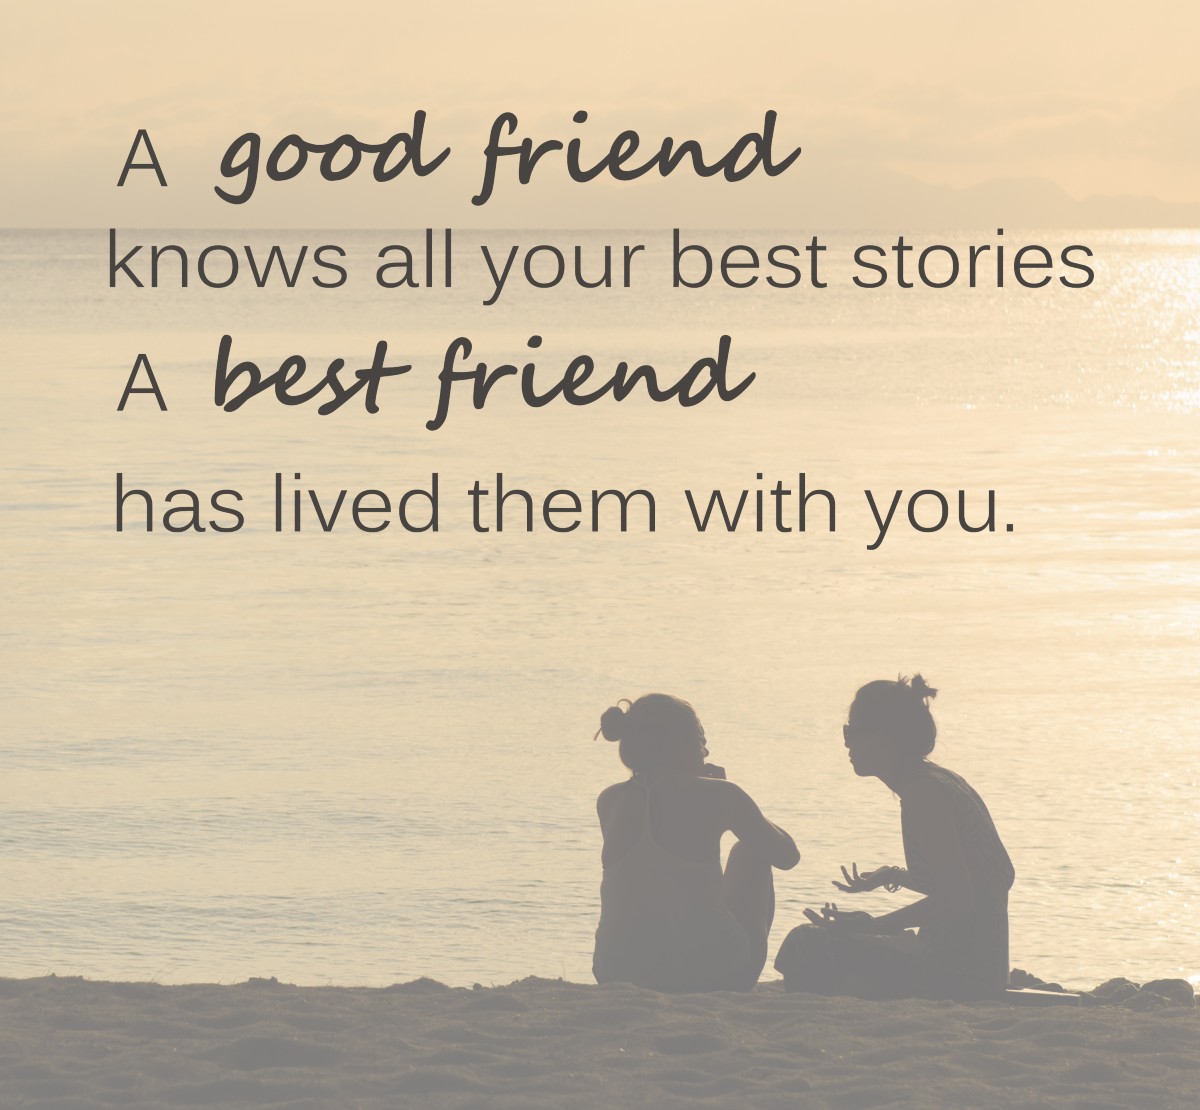 Happy Friendship Day 2021: Images, Wishes, Quotes, Messages and